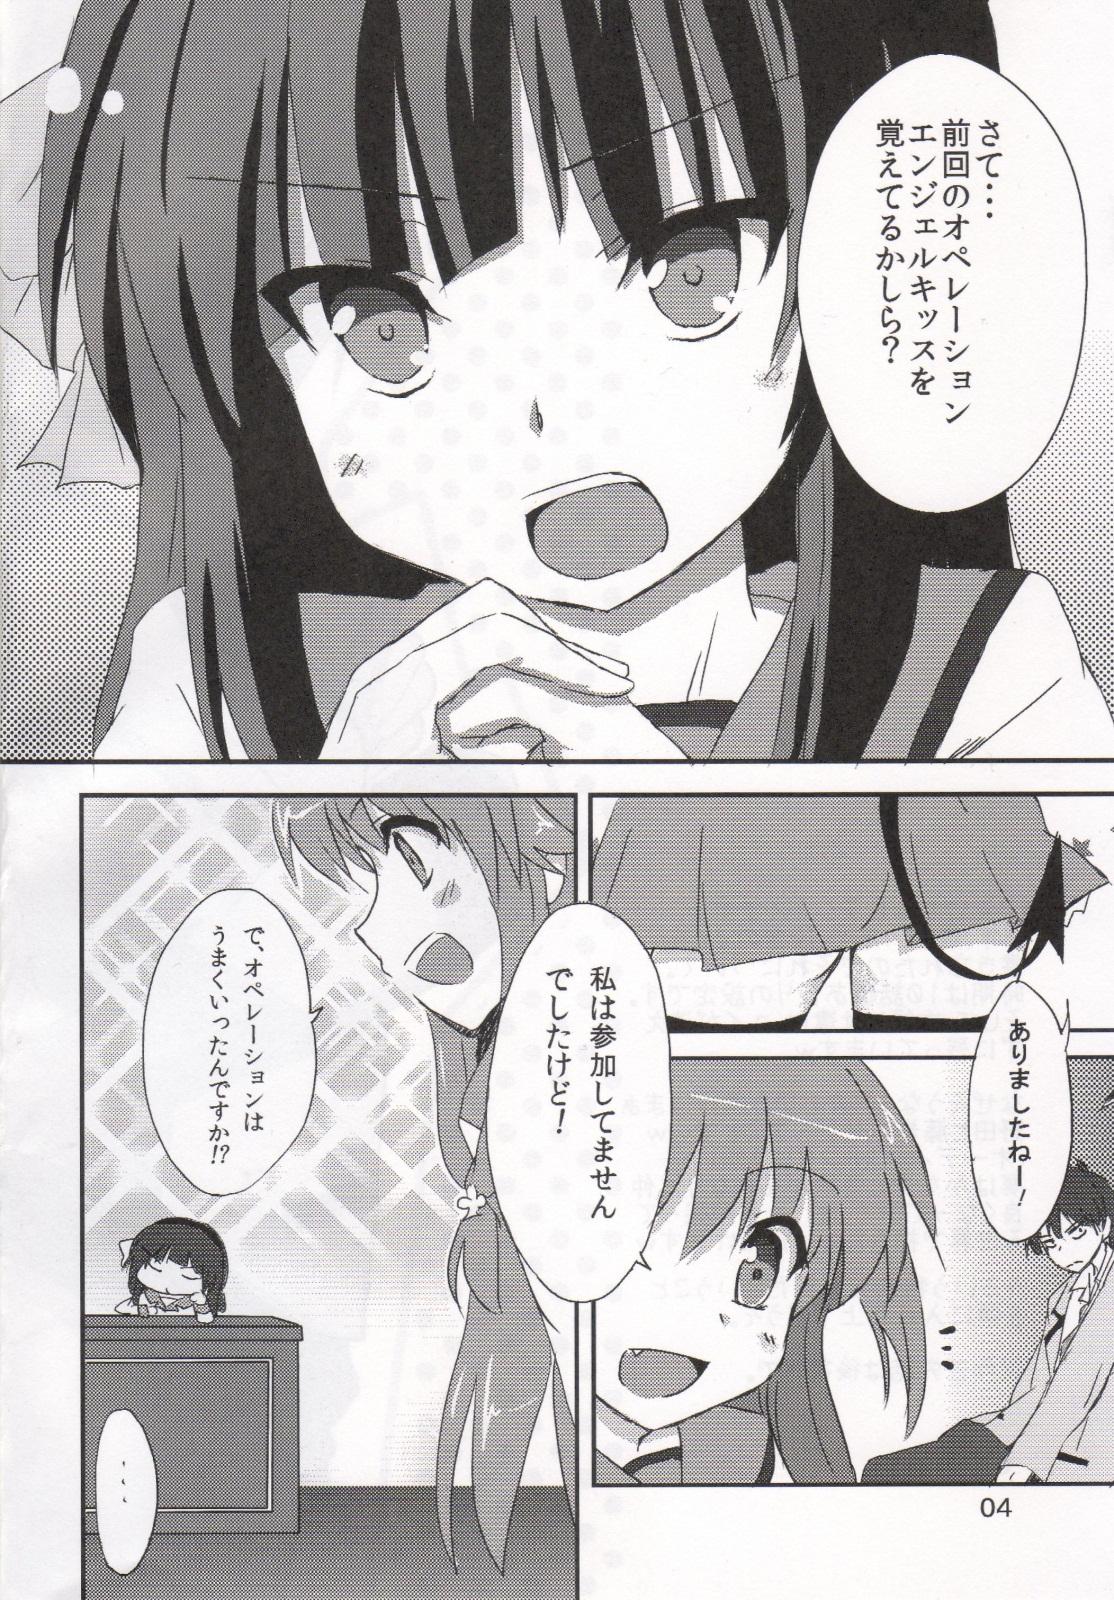 Ginger My Heart is yours! ver.2♪ - Angel beats Making Love Porn - Page 3